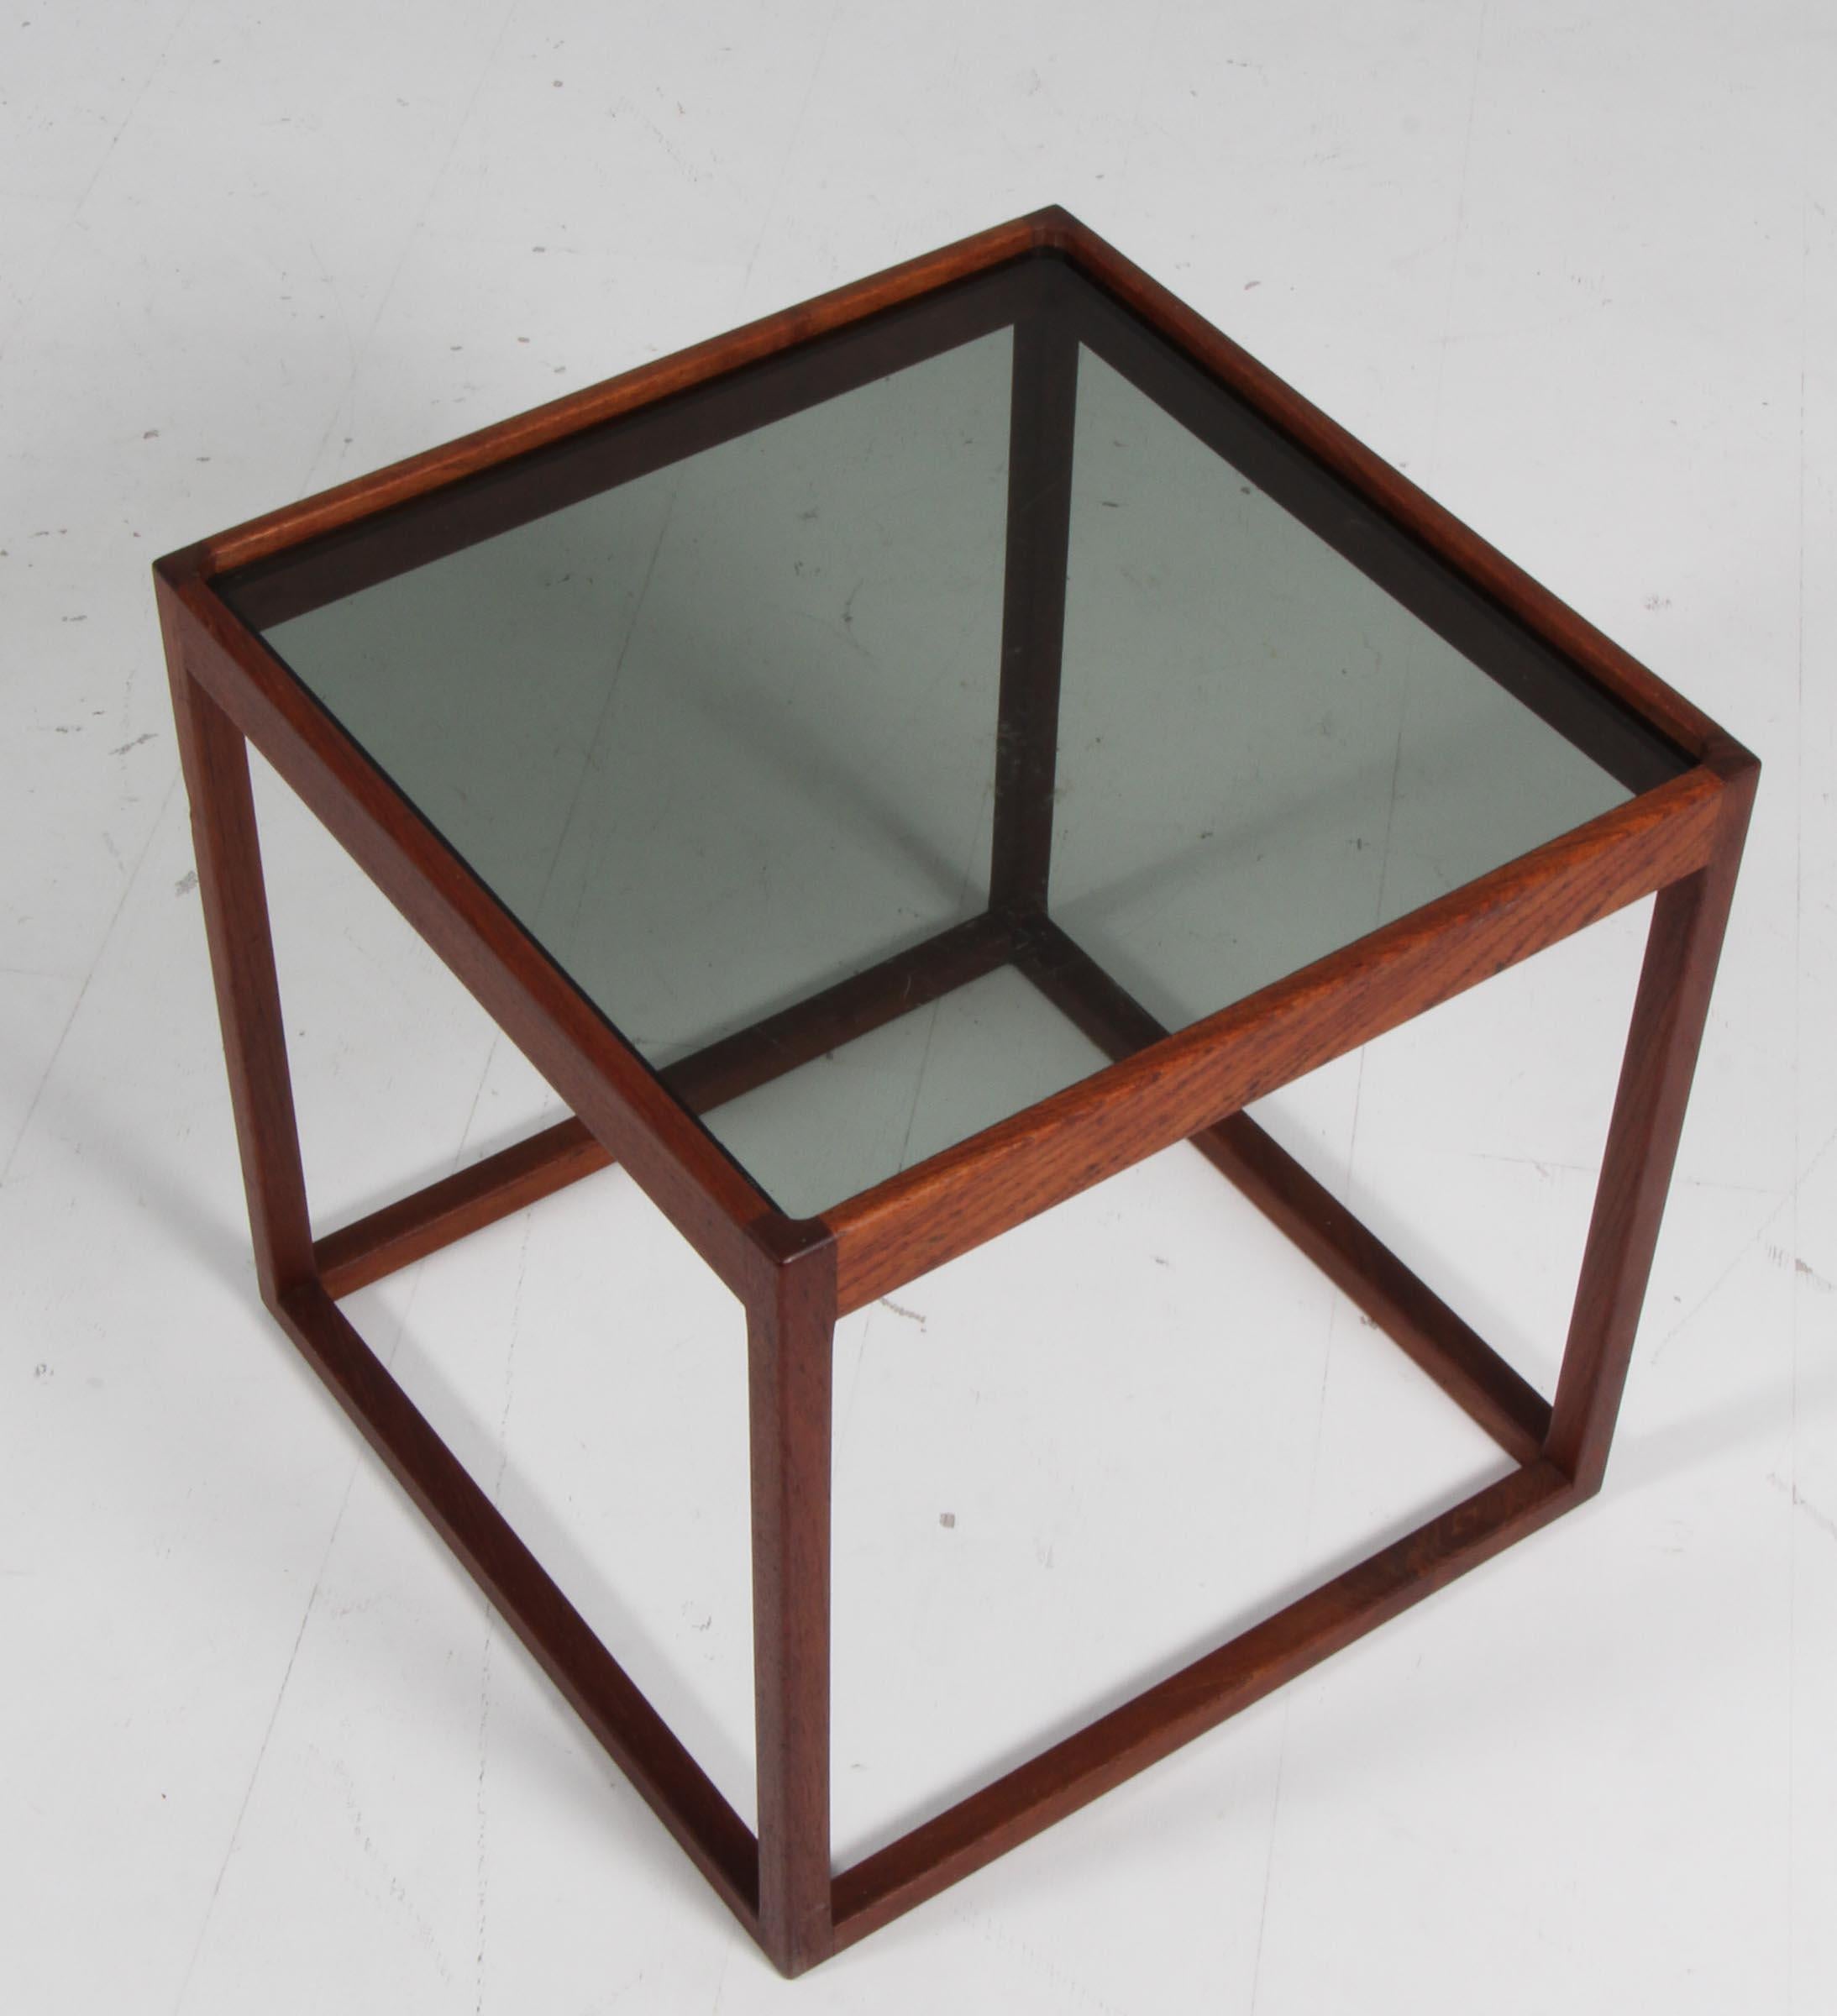 Kurt Østervig cube table in teak, with plate of smoked glass.

Made in the 1960s